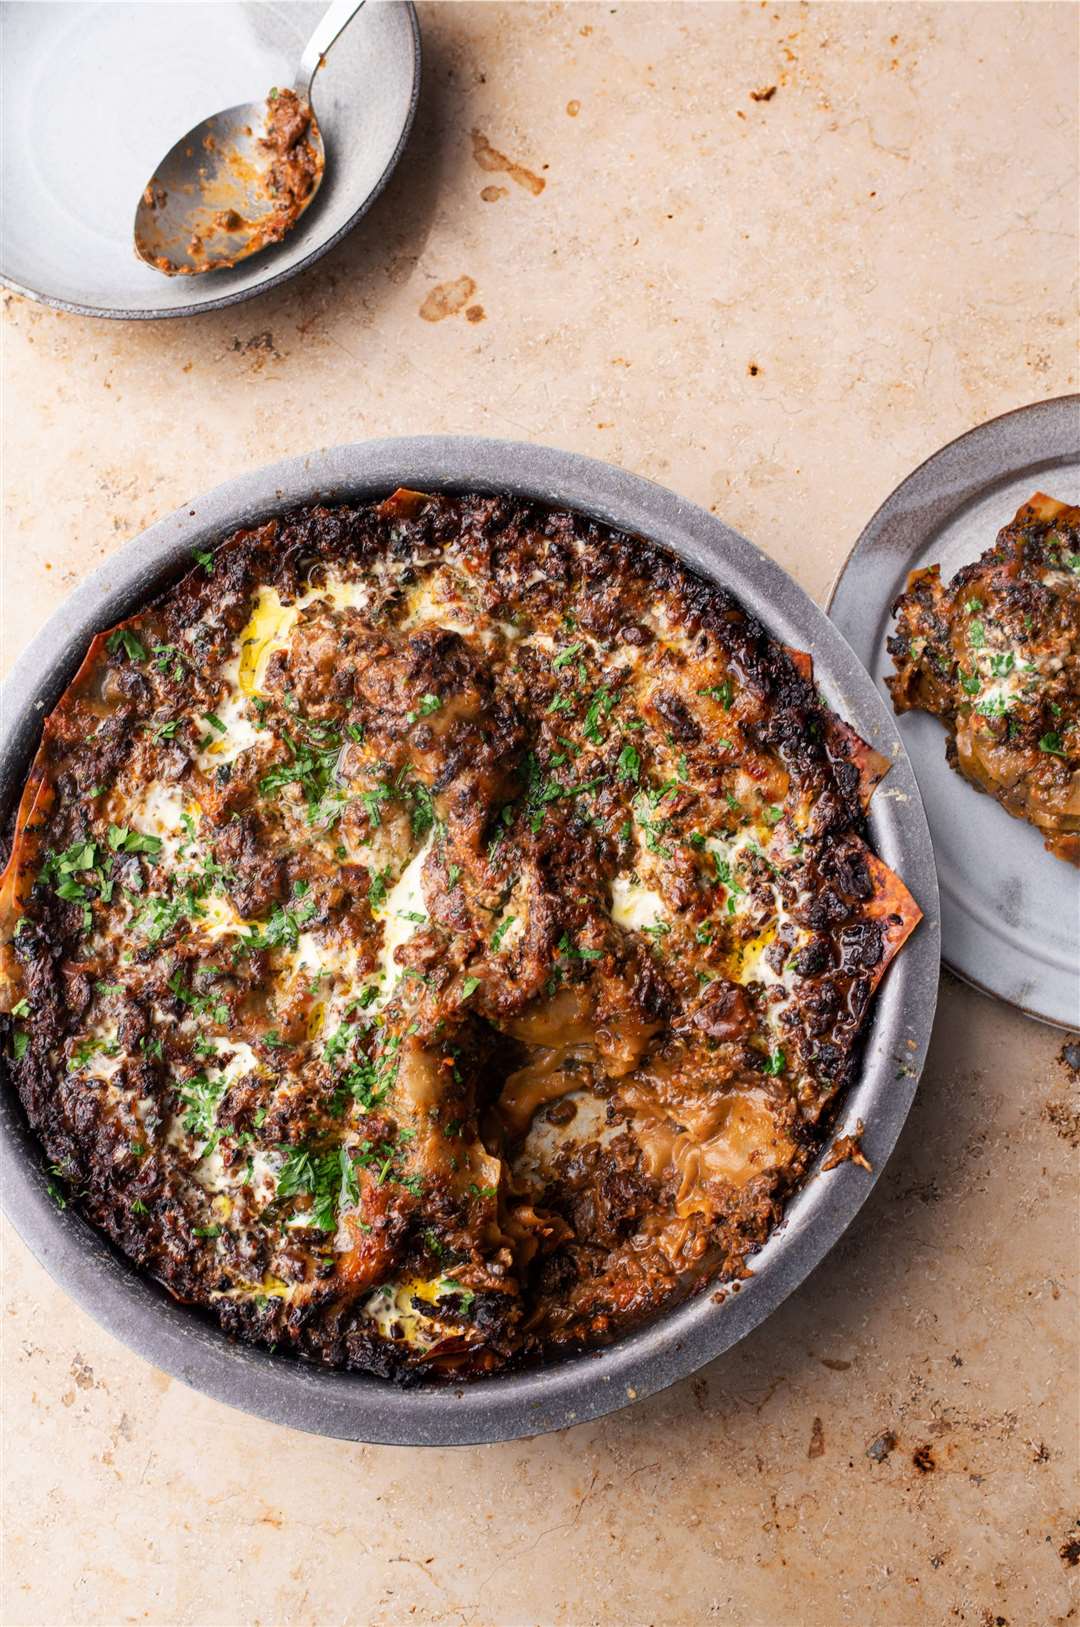 Spicy mushroom lasagne from Ottolenghi Flavour by Yotam Ottolenghi and Ixta Belfrage (Ebury Press, £27). Picture: Jonathan Lovekin/PA.